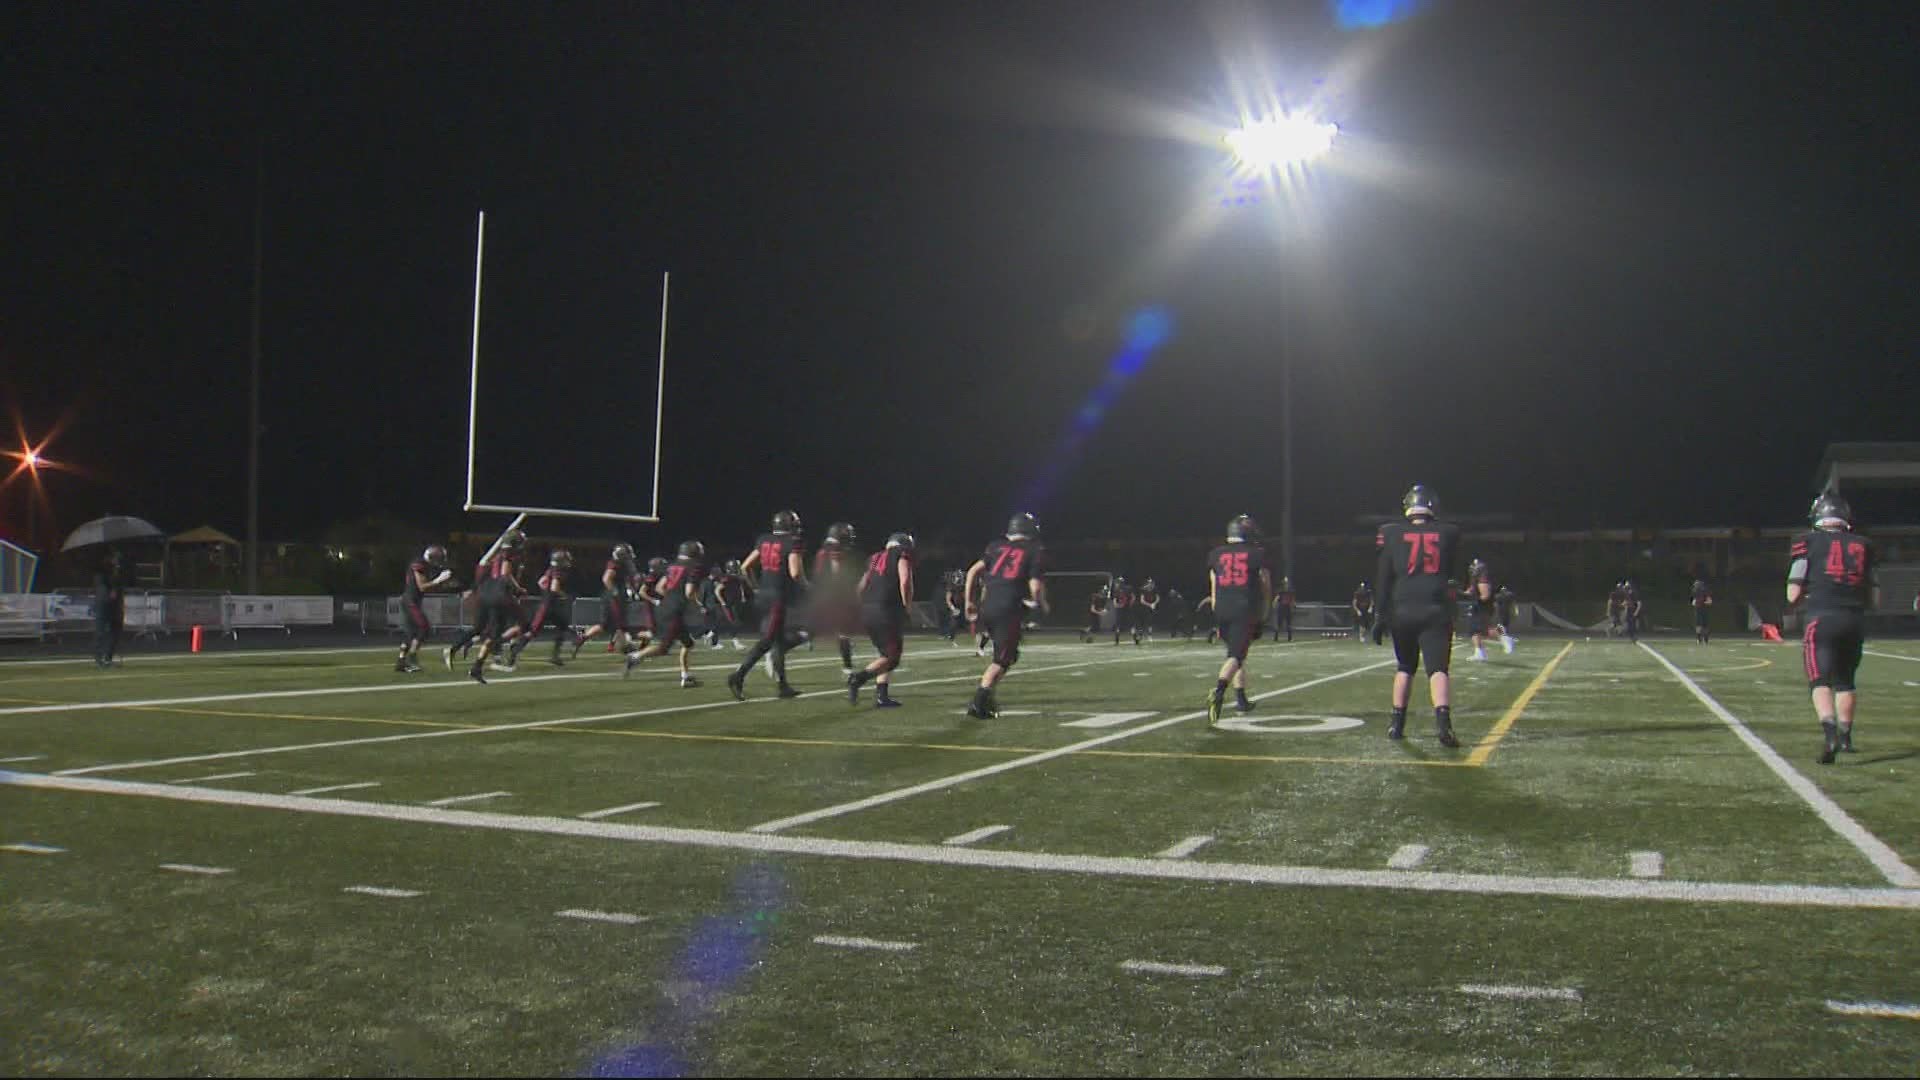 The Camas Papermakers were back on the football field Friday evening to kick off their season that was delayed by the pandemic.